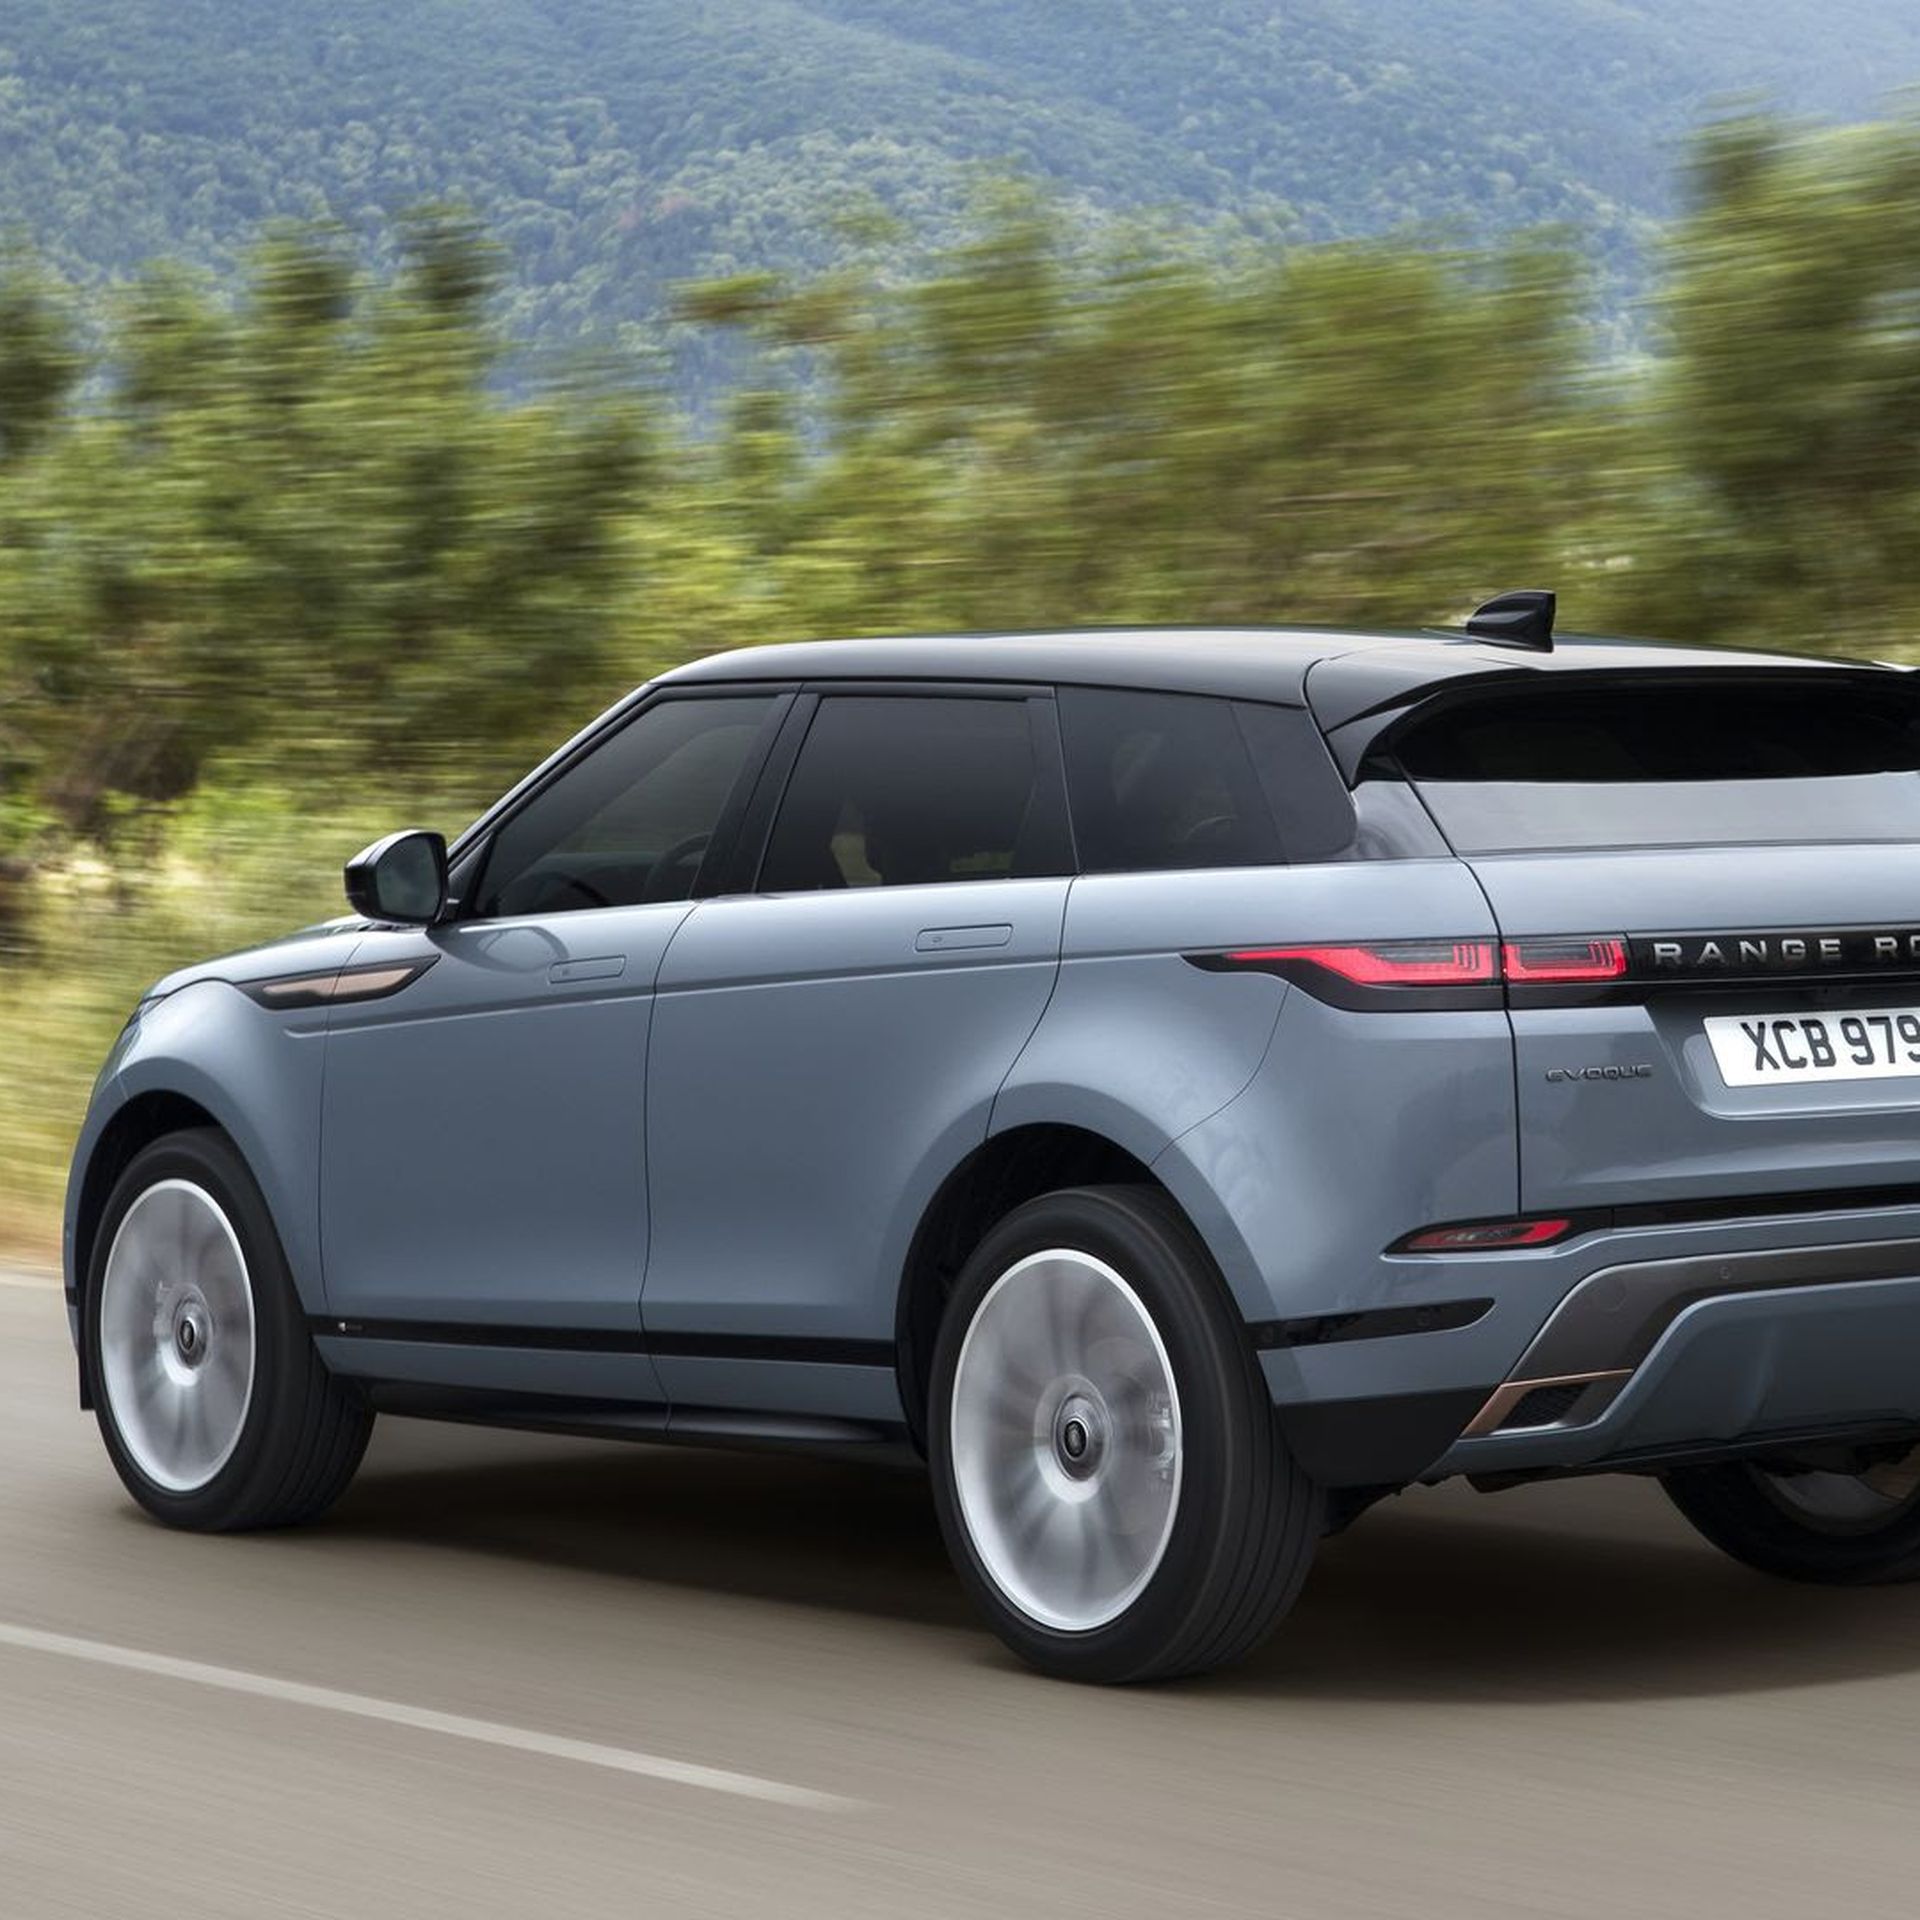 Introducing the all-new 2020 Range Rover Evoque